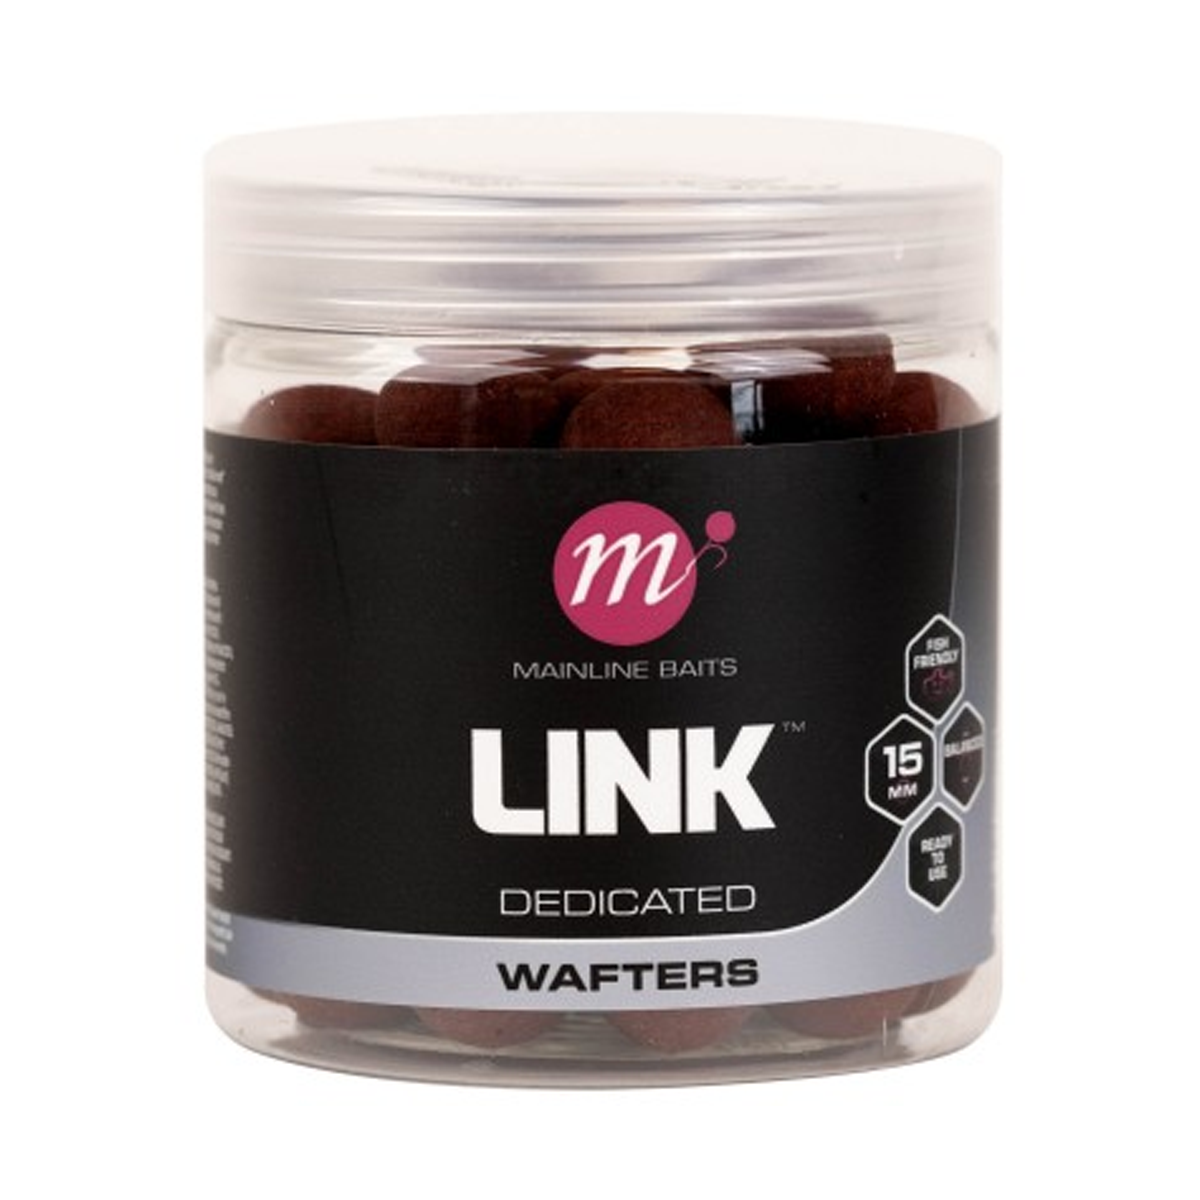 Mainline Balanced Wafter The Link 15mm